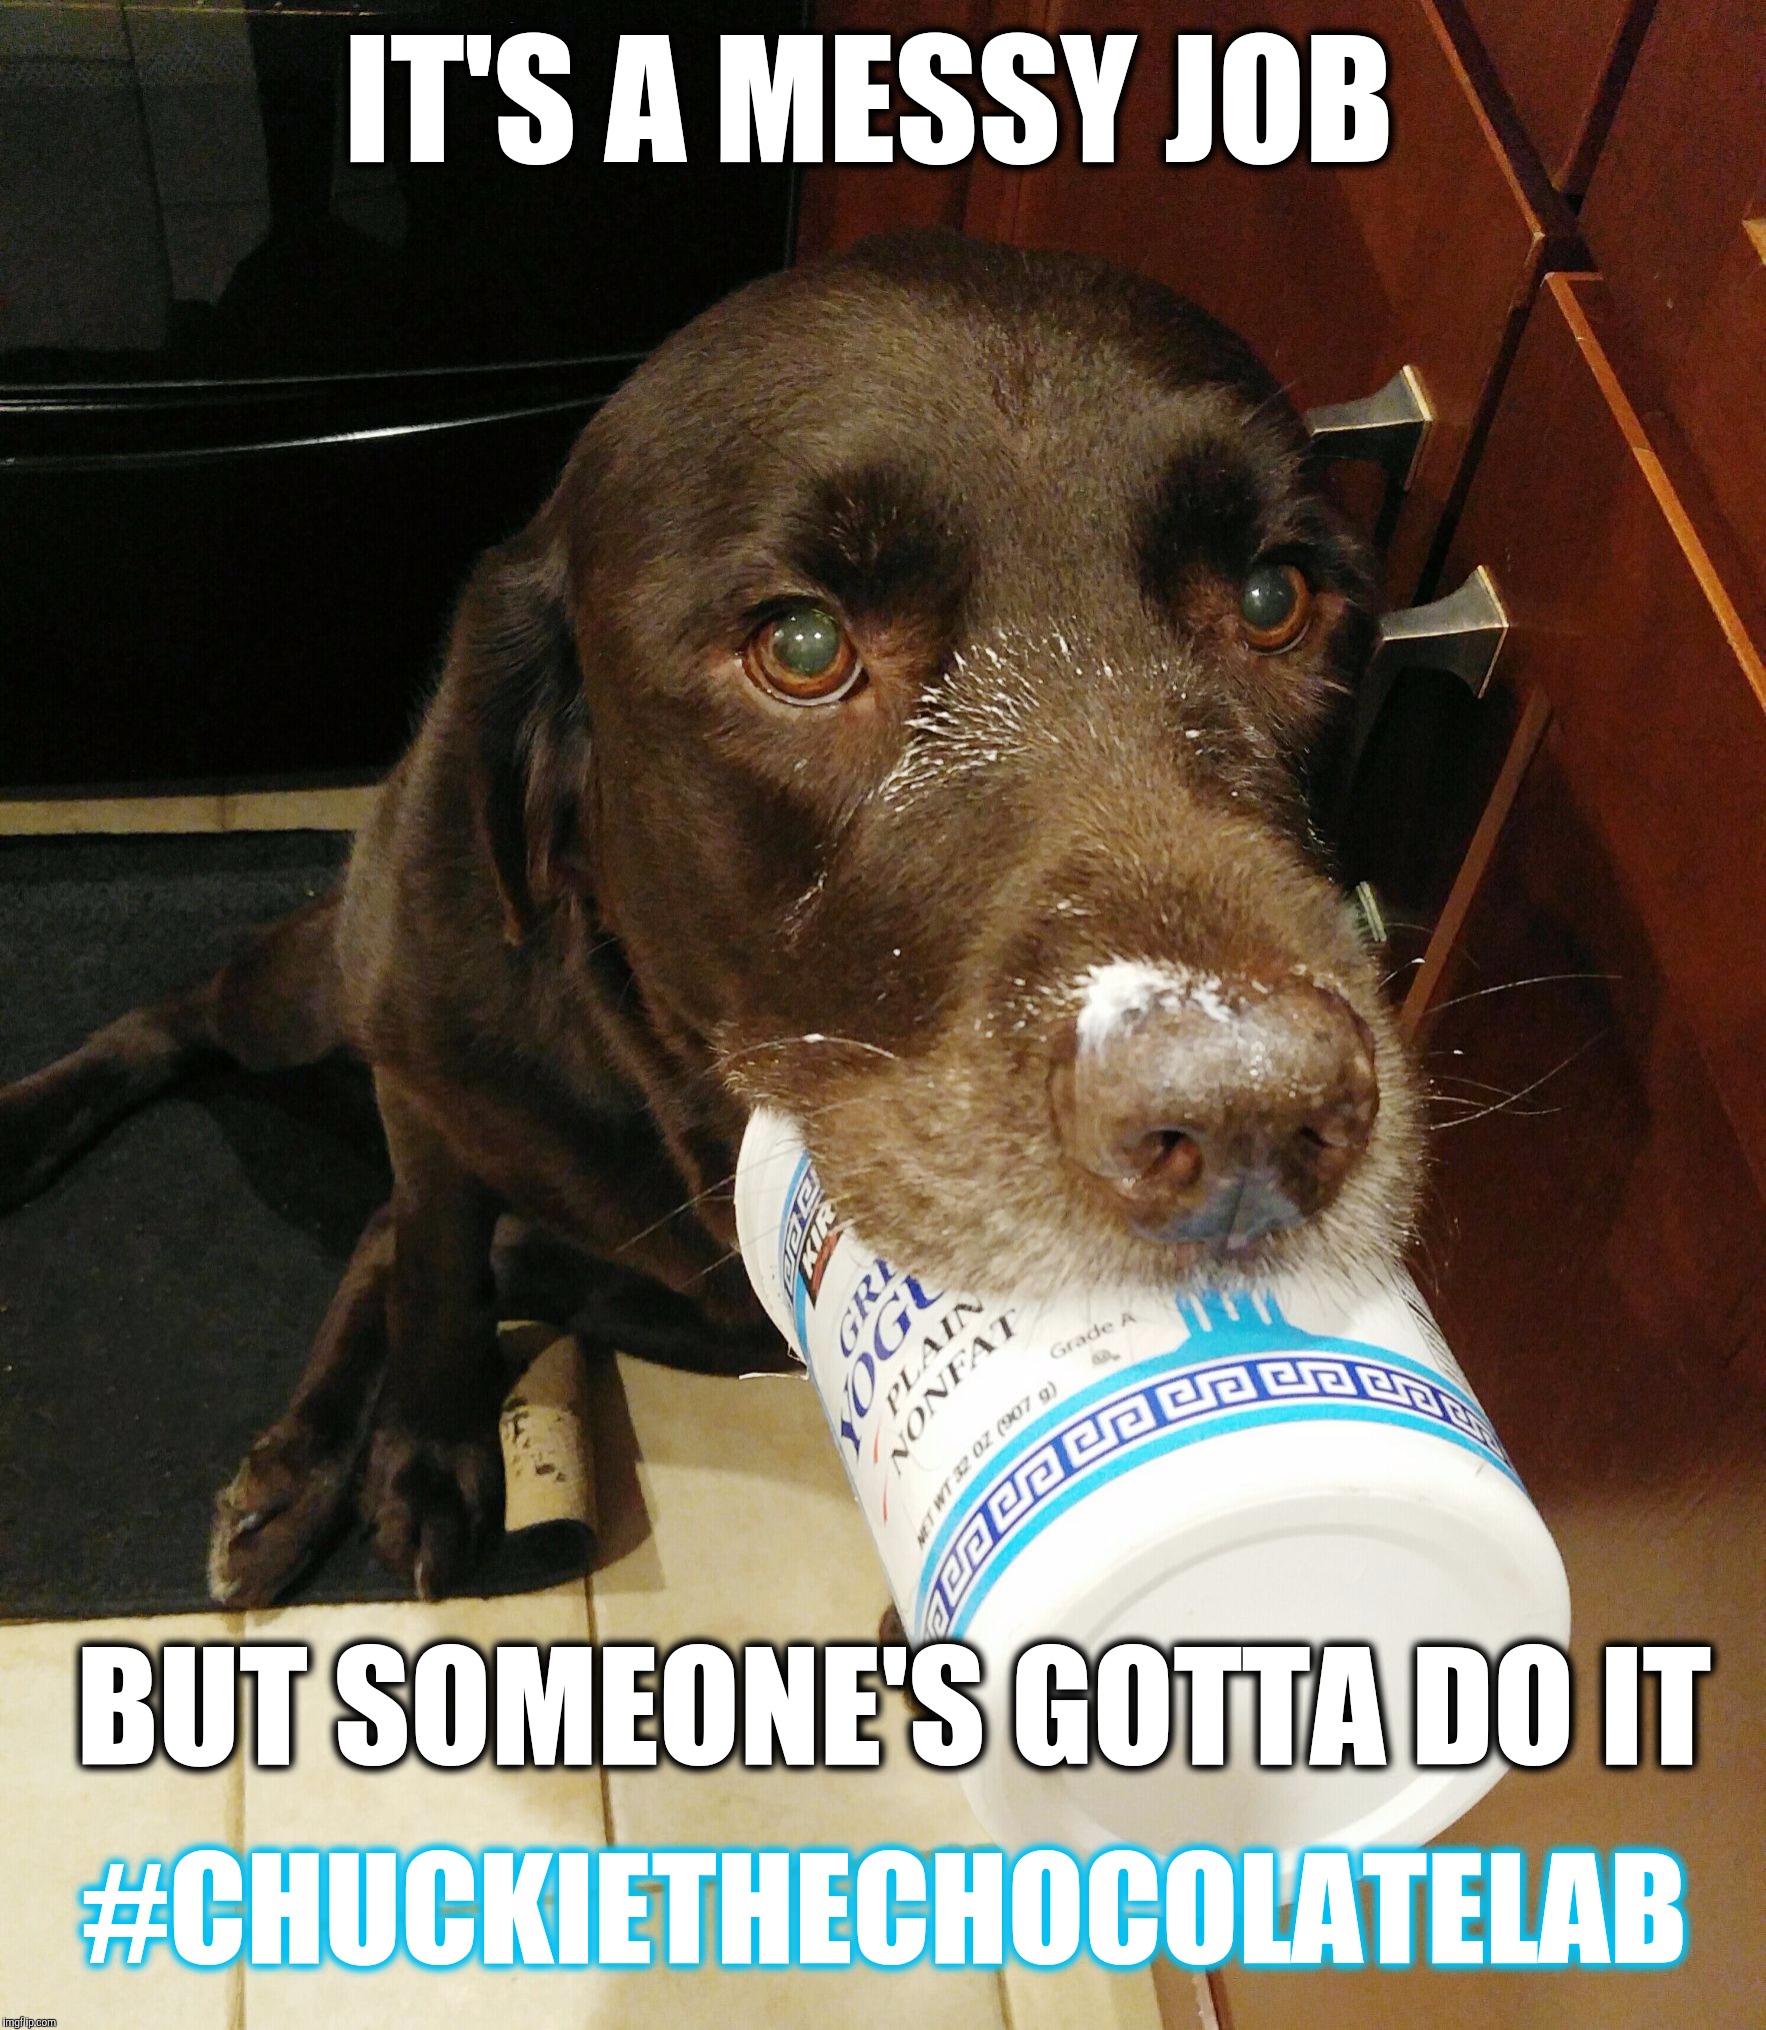 It's a messy job, but someone's gotta do it  | IT'S A MESSY JOB; BUT SOMEONE'S GOTTA DO IT; #CHUCKIETHECHOCOLATELAB | image tagged in chuckie the chocolate lab,messy job,funny,dog memes,labrador,yogurt | made w/ Imgflip meme maker